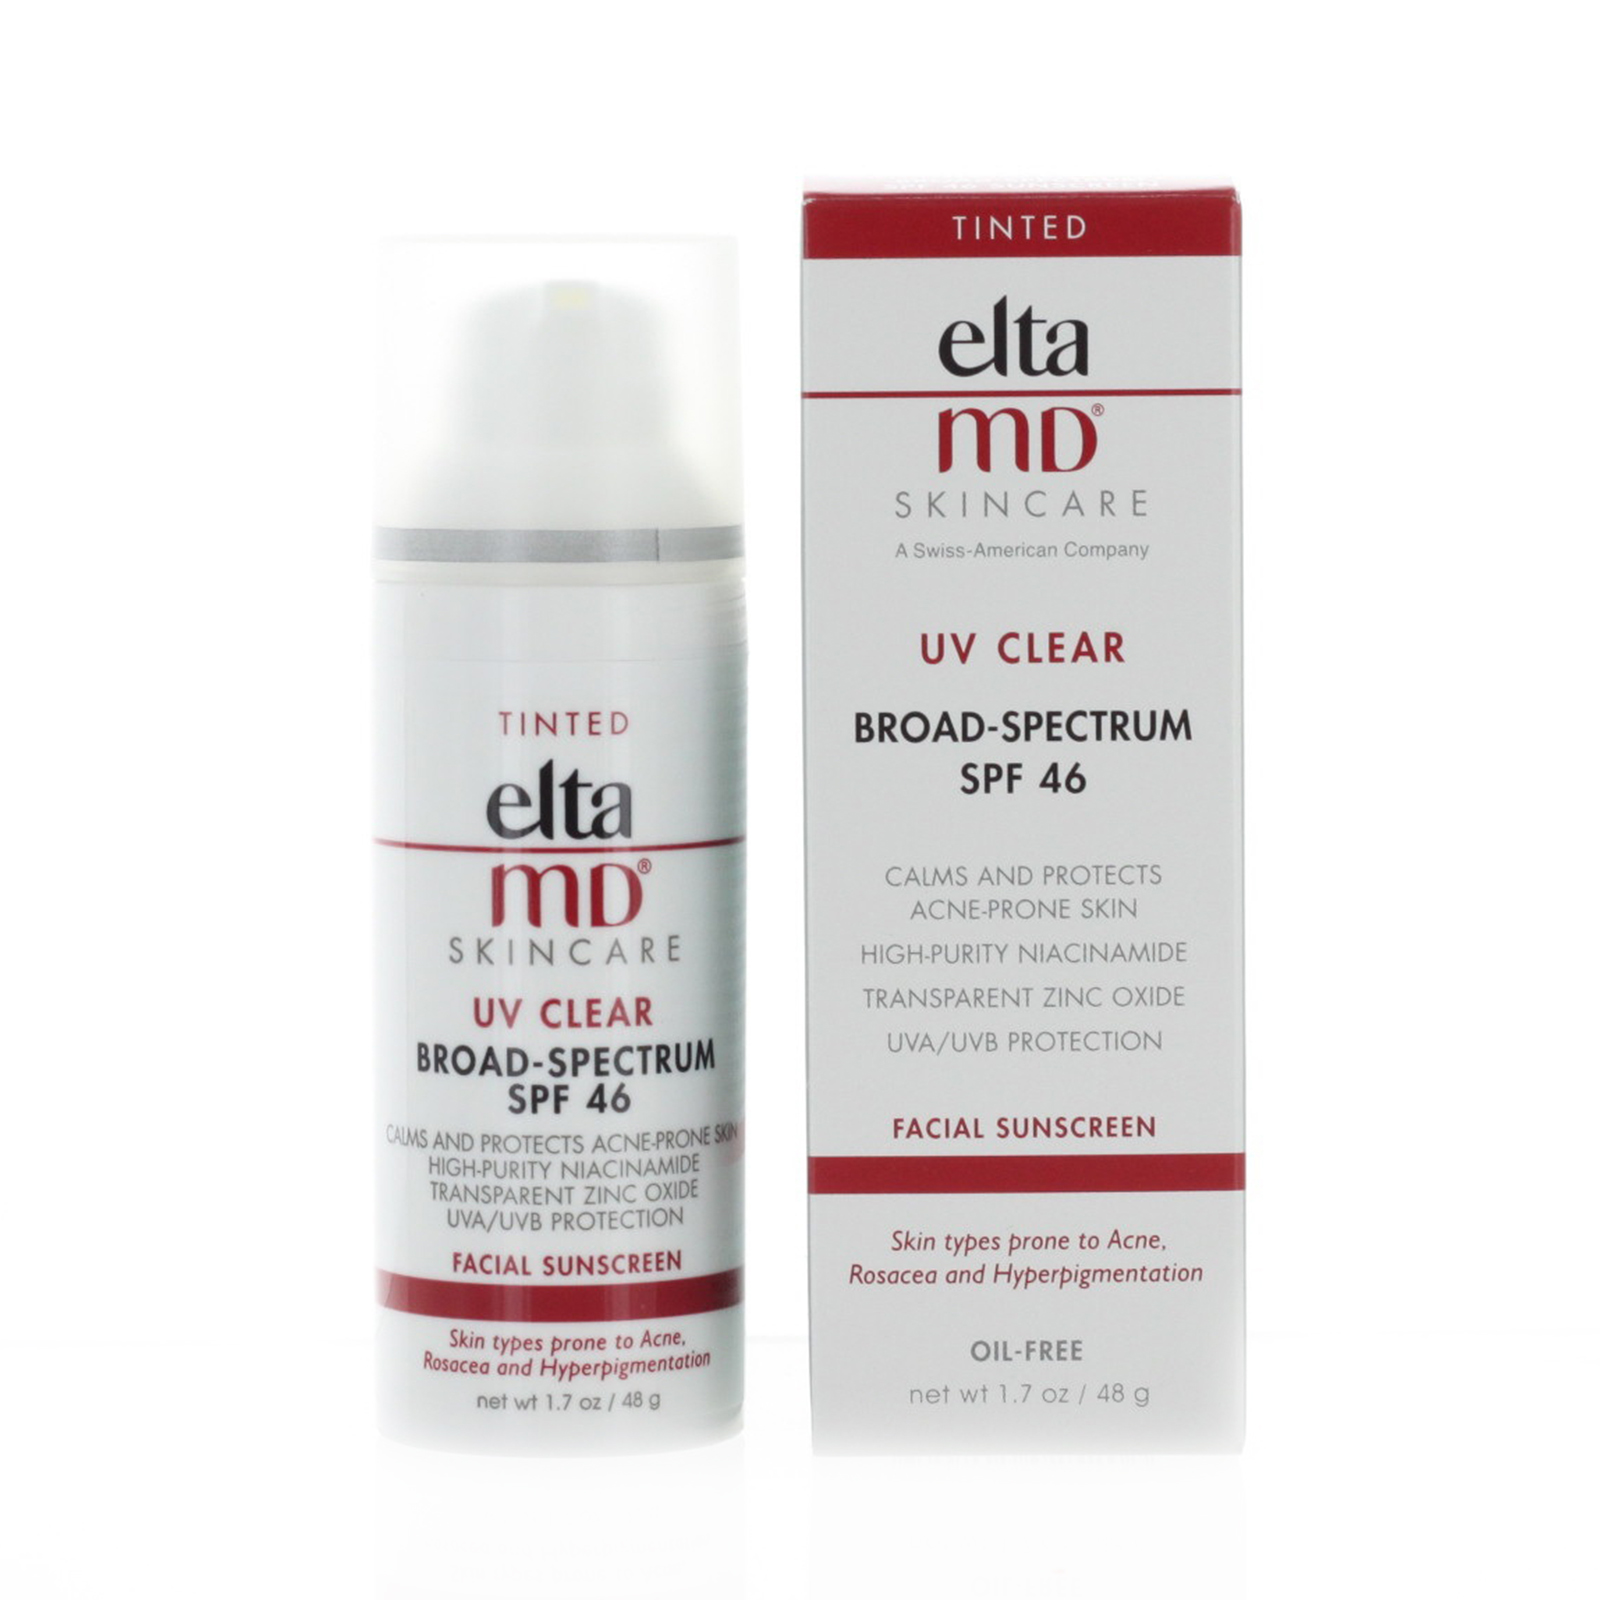 elta md tinted sunscreen dupe